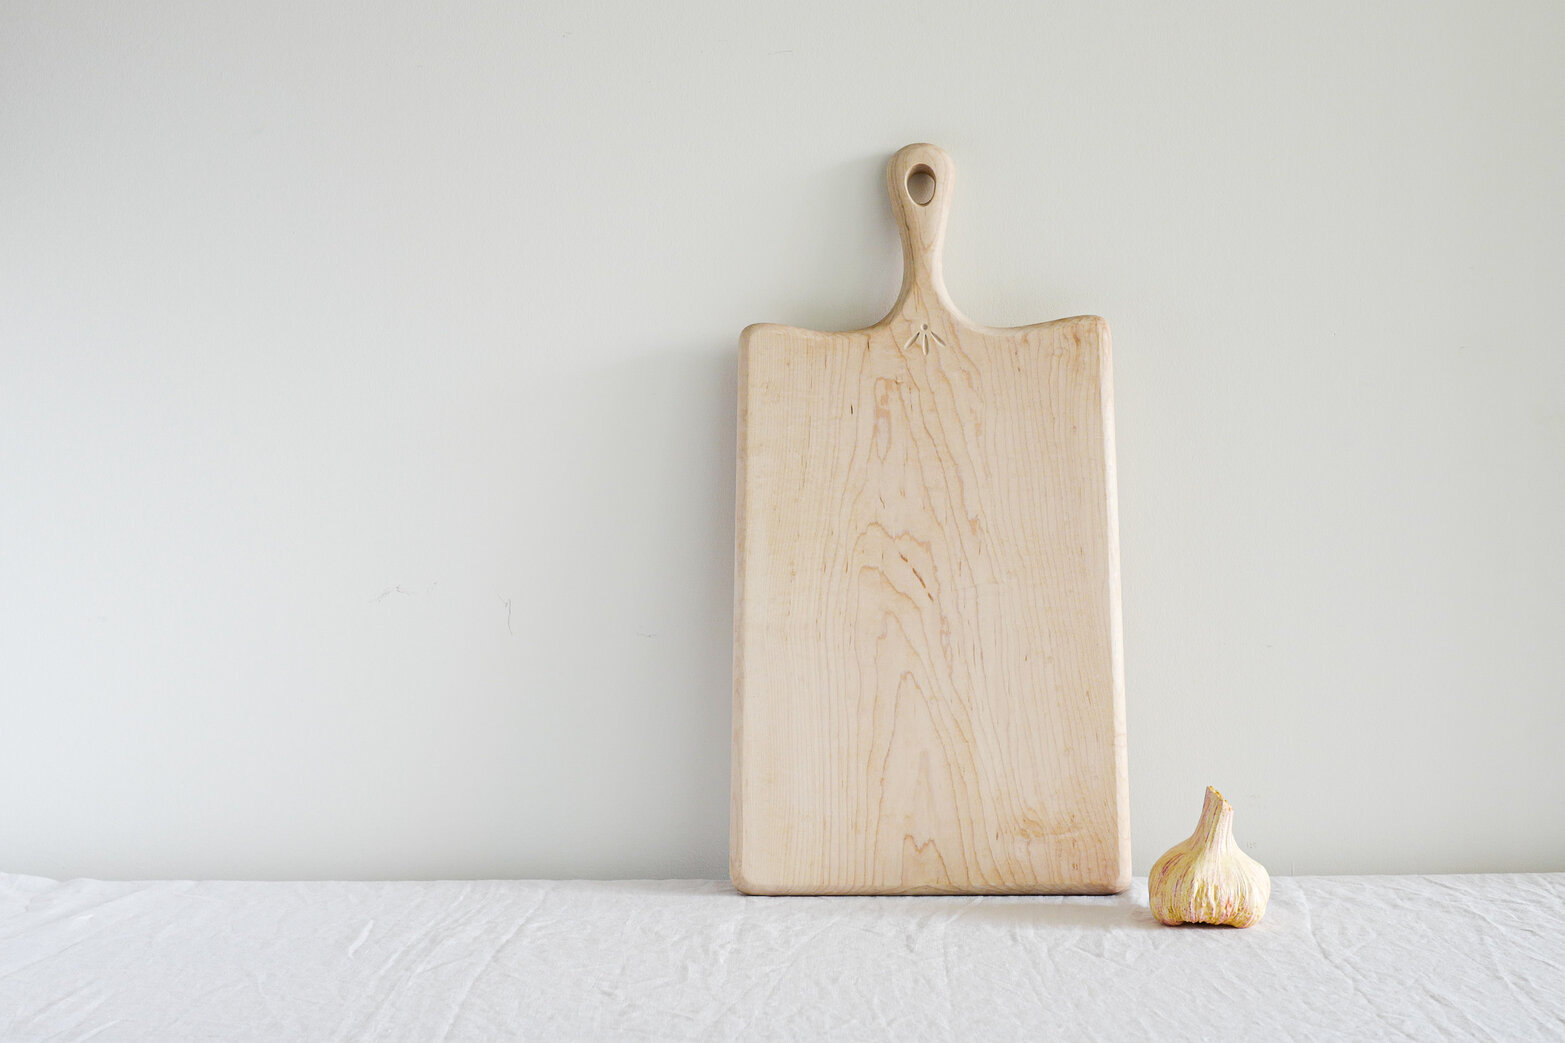 BCMT MAPLE LARGE CUTTING BOARD1 File